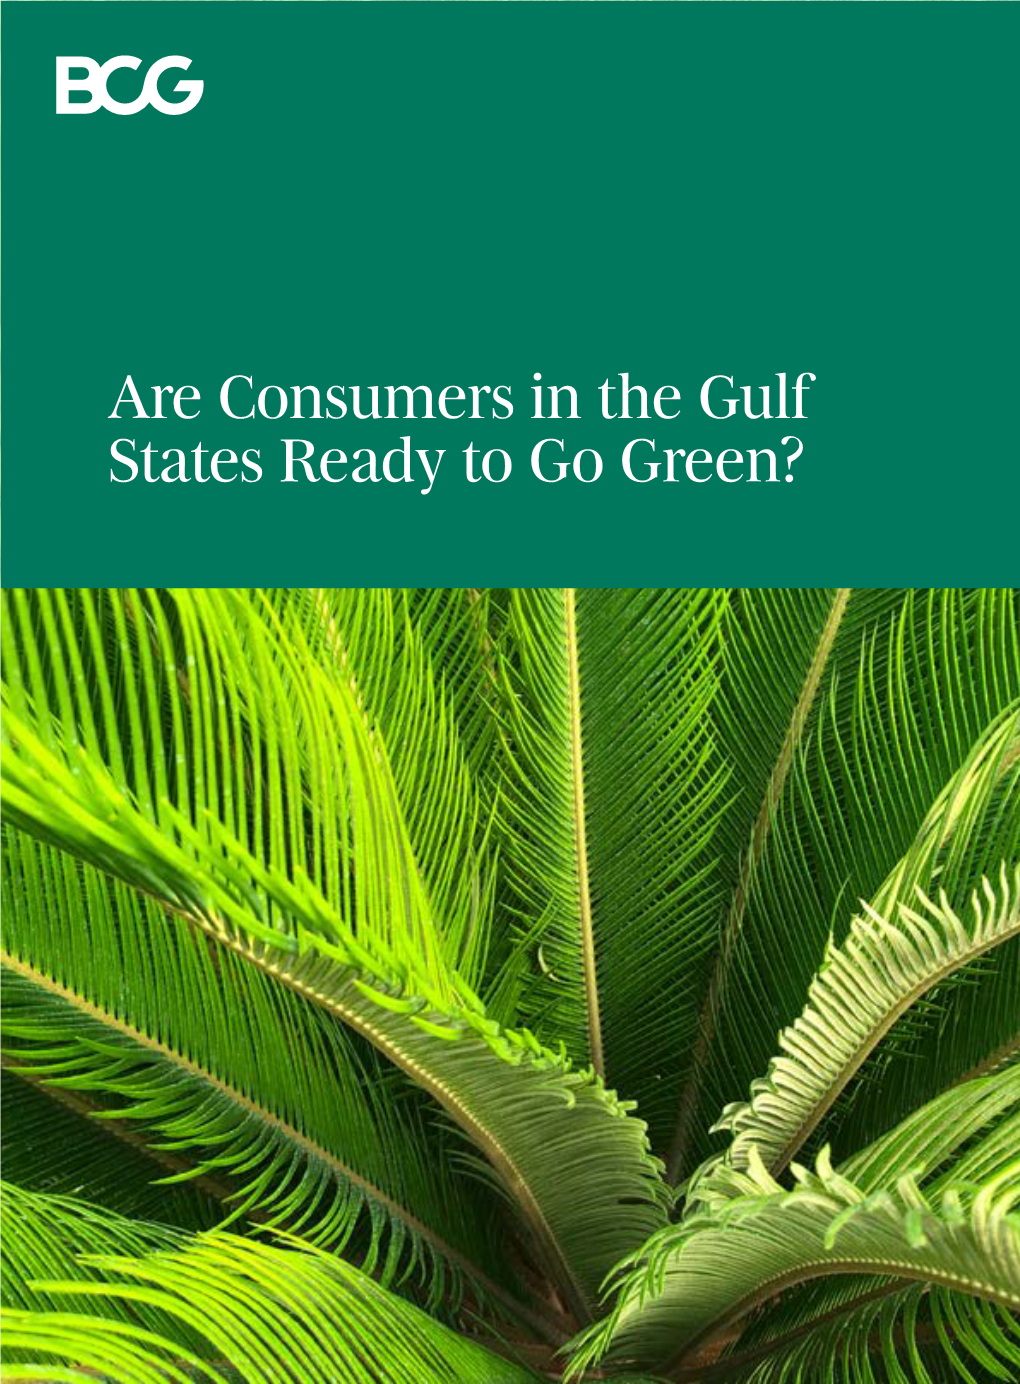 Are Consumers in the Gulf States Ready to Go Green?